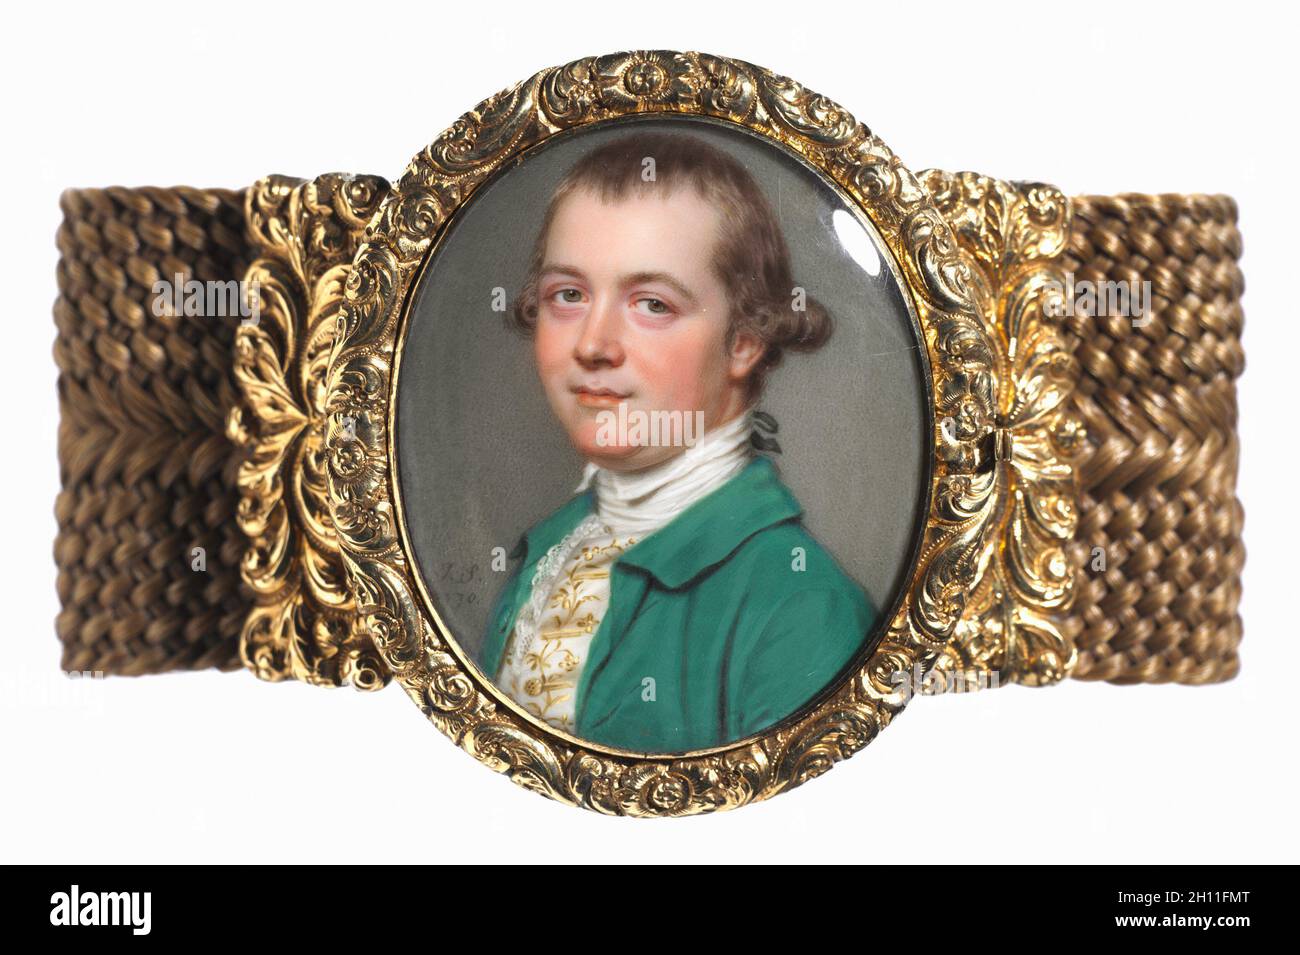 Portrait of Constantine Phipps, 1770. John I Smart (British, 1741-1811). Watercolor on ivory in a later gold and woven hair bracelet; framed: 4.6 x 4.1 cm (1 13/16 x 1 5/8 in.); unframed: 3.8 x 3.2 cm (1 1/2 x 1 1/4 in.). Stock Photo